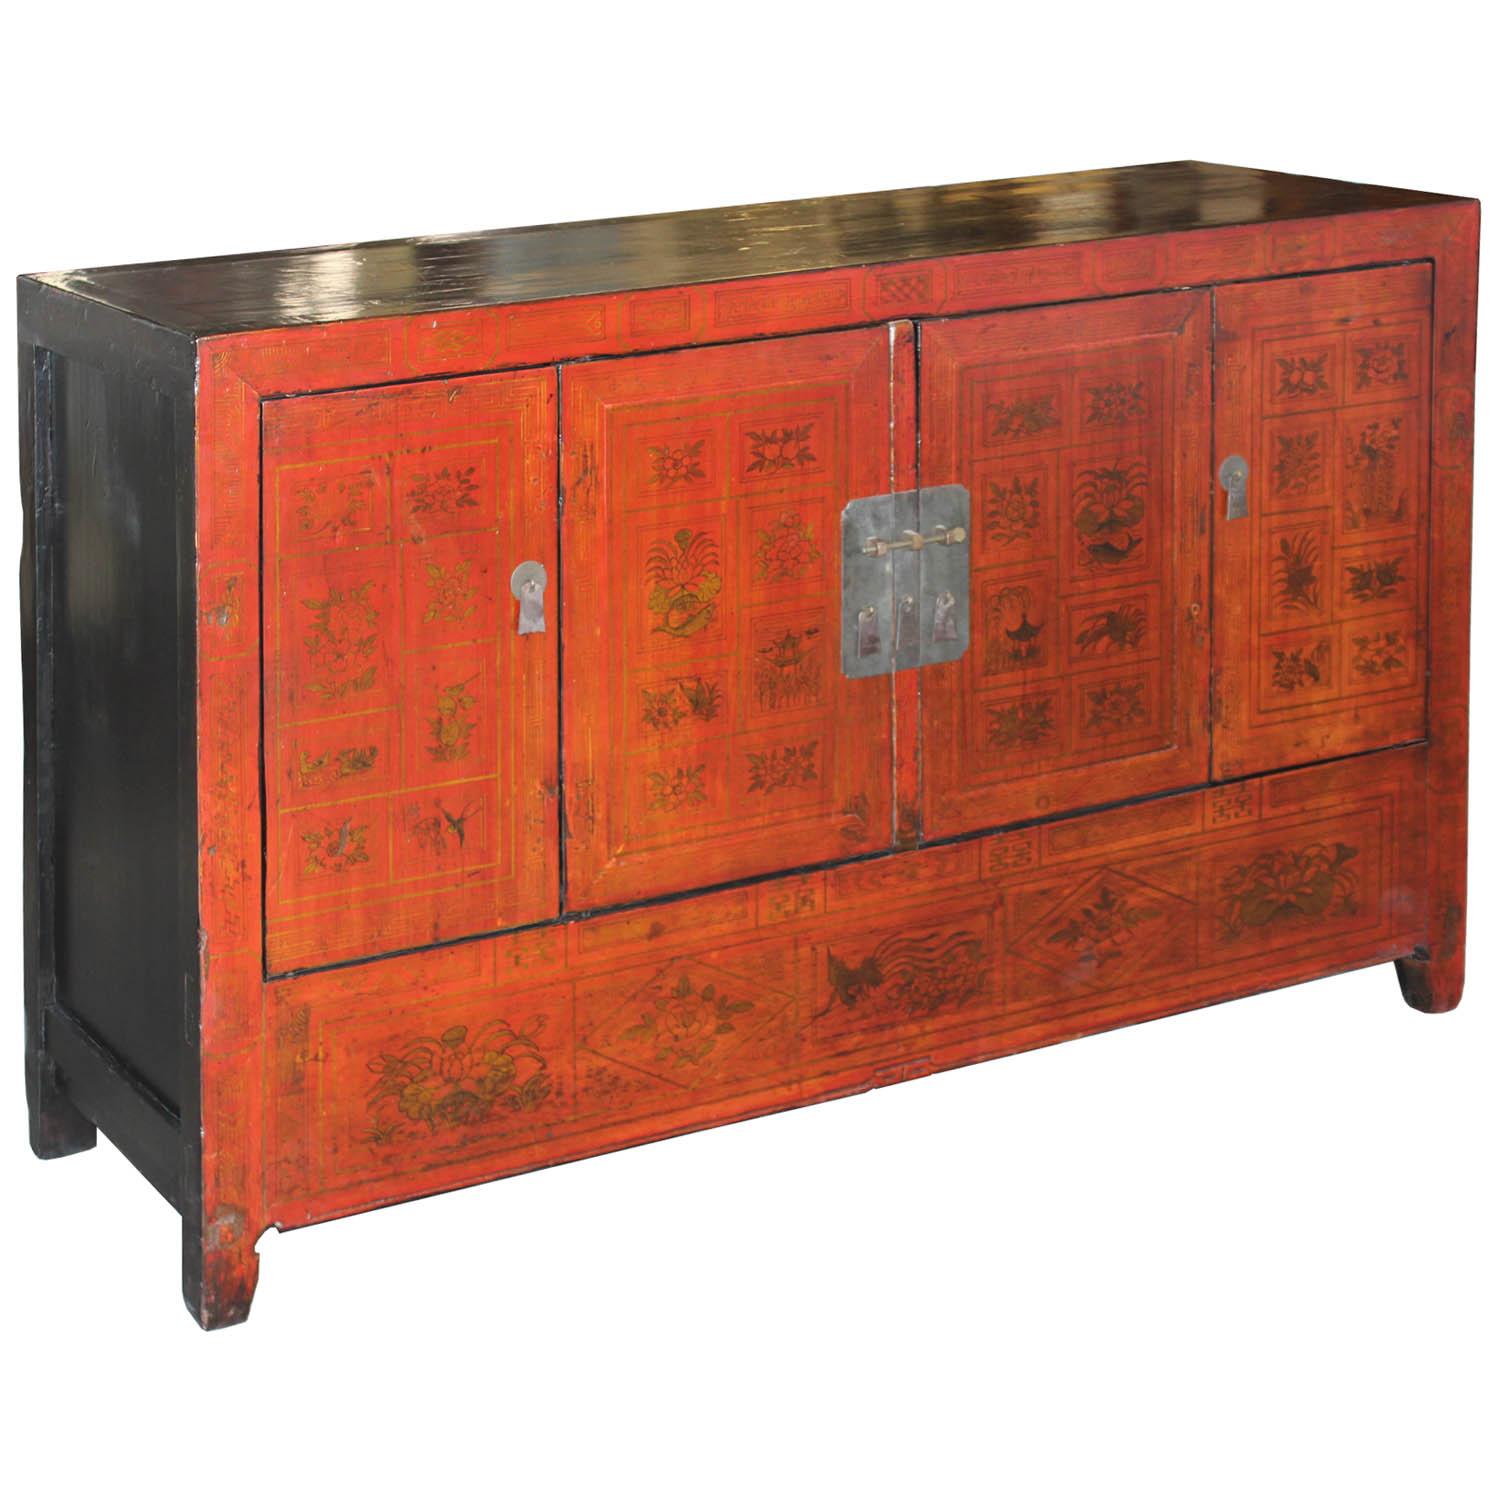 Unique red lacquer wedding buffet originally gifted to the bride and groom. Hand paintings of auspicious plants and flora depicting good fortune, happiness, and prosperity. New interior shelf and hardware. Dongbei, China, circa 1920s.